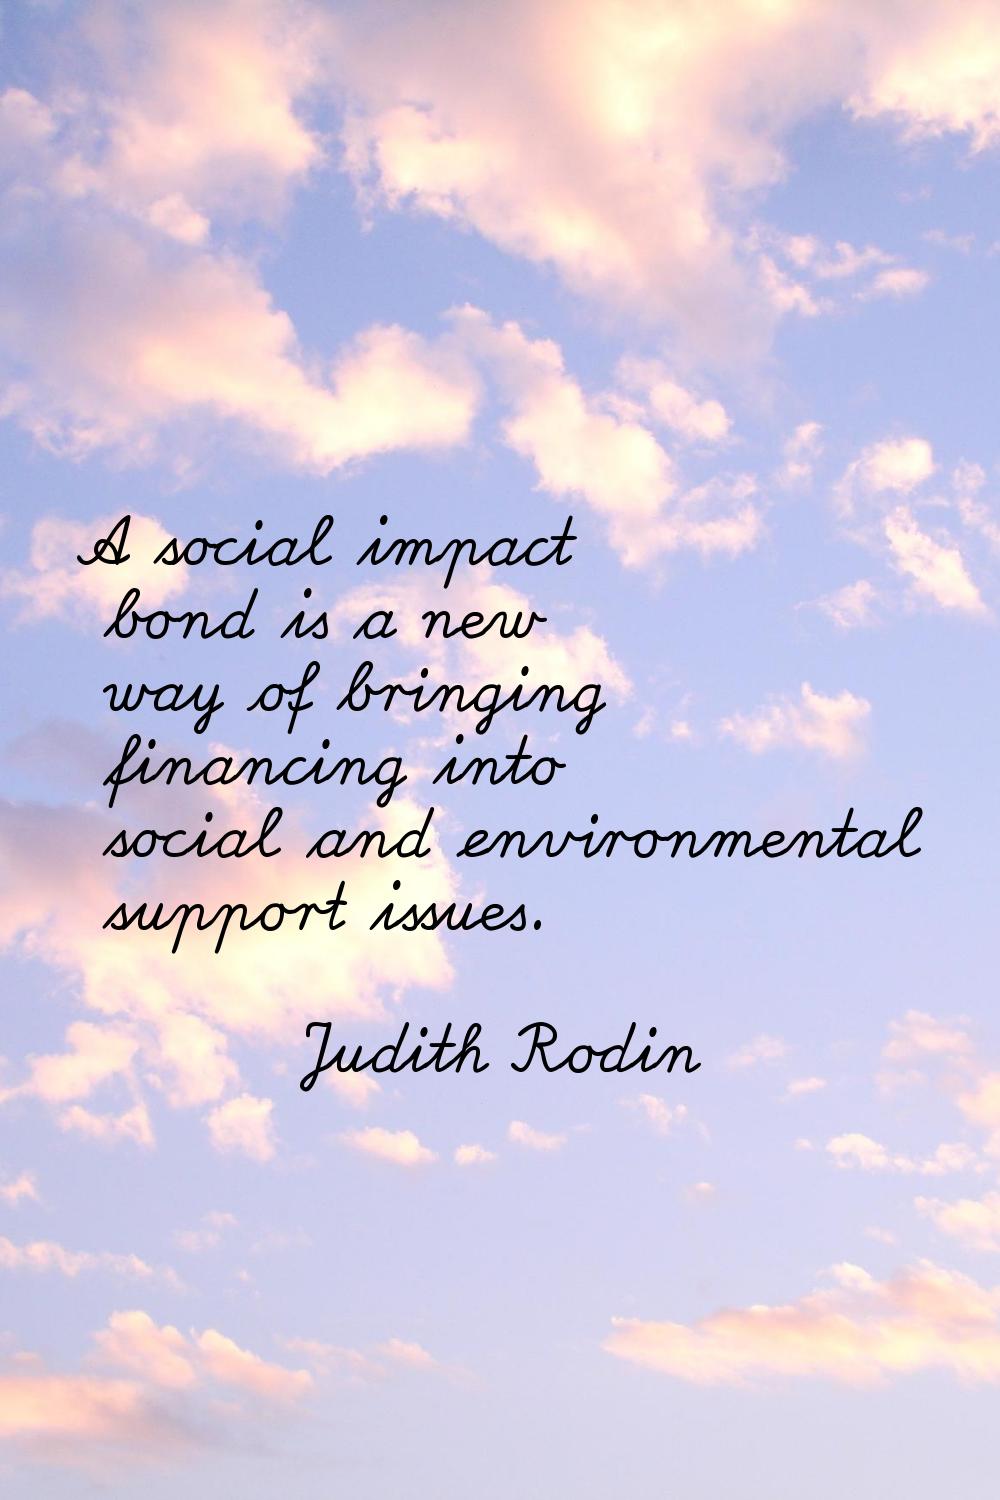 A social impact bond is a new way of bringing financing into social and environmental support issue